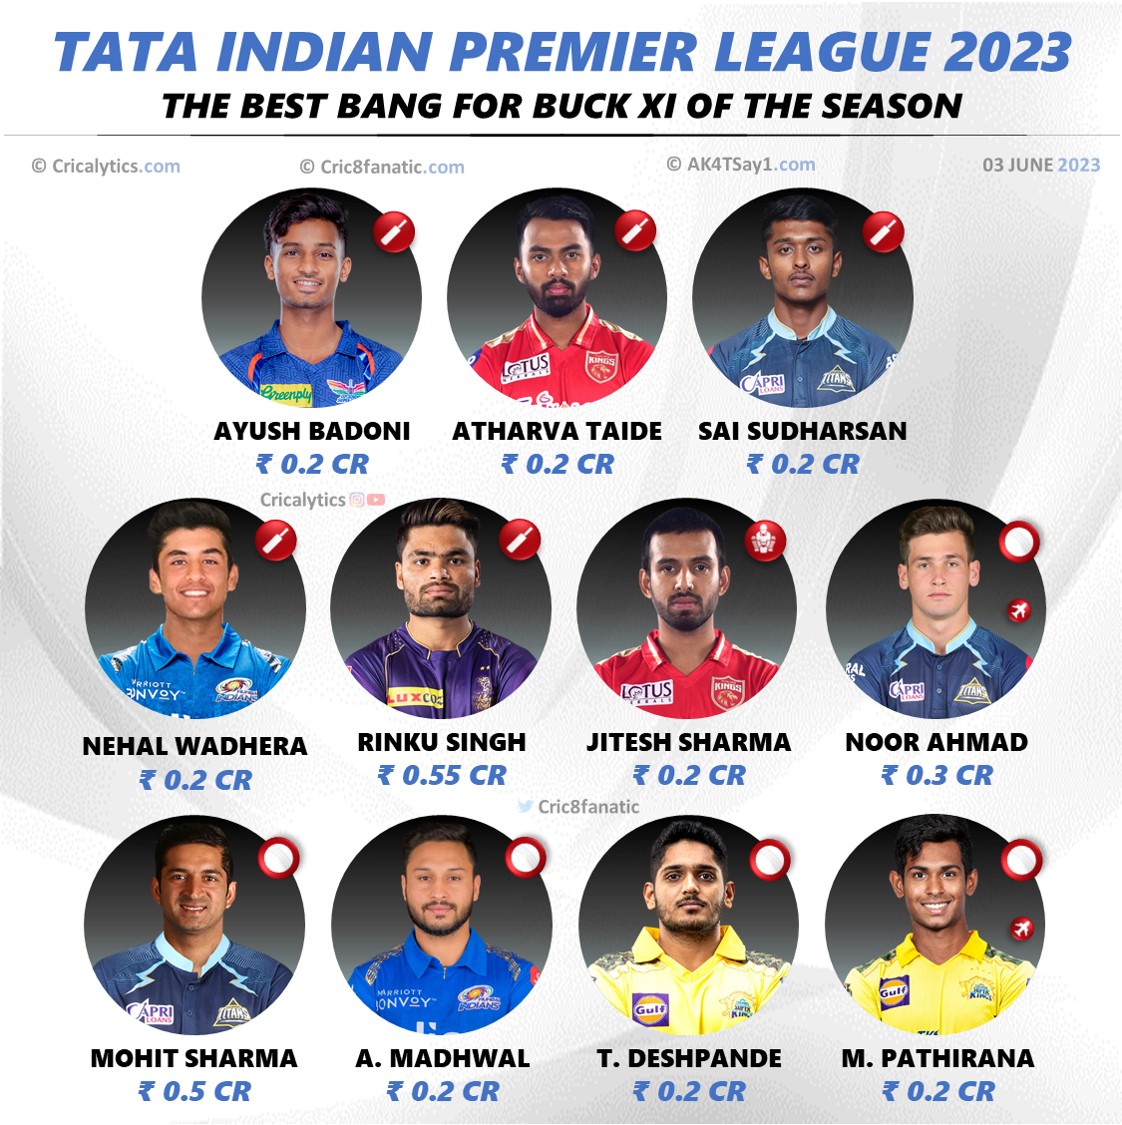 ipl 2023 cost efficient bang for buck 11 of the season